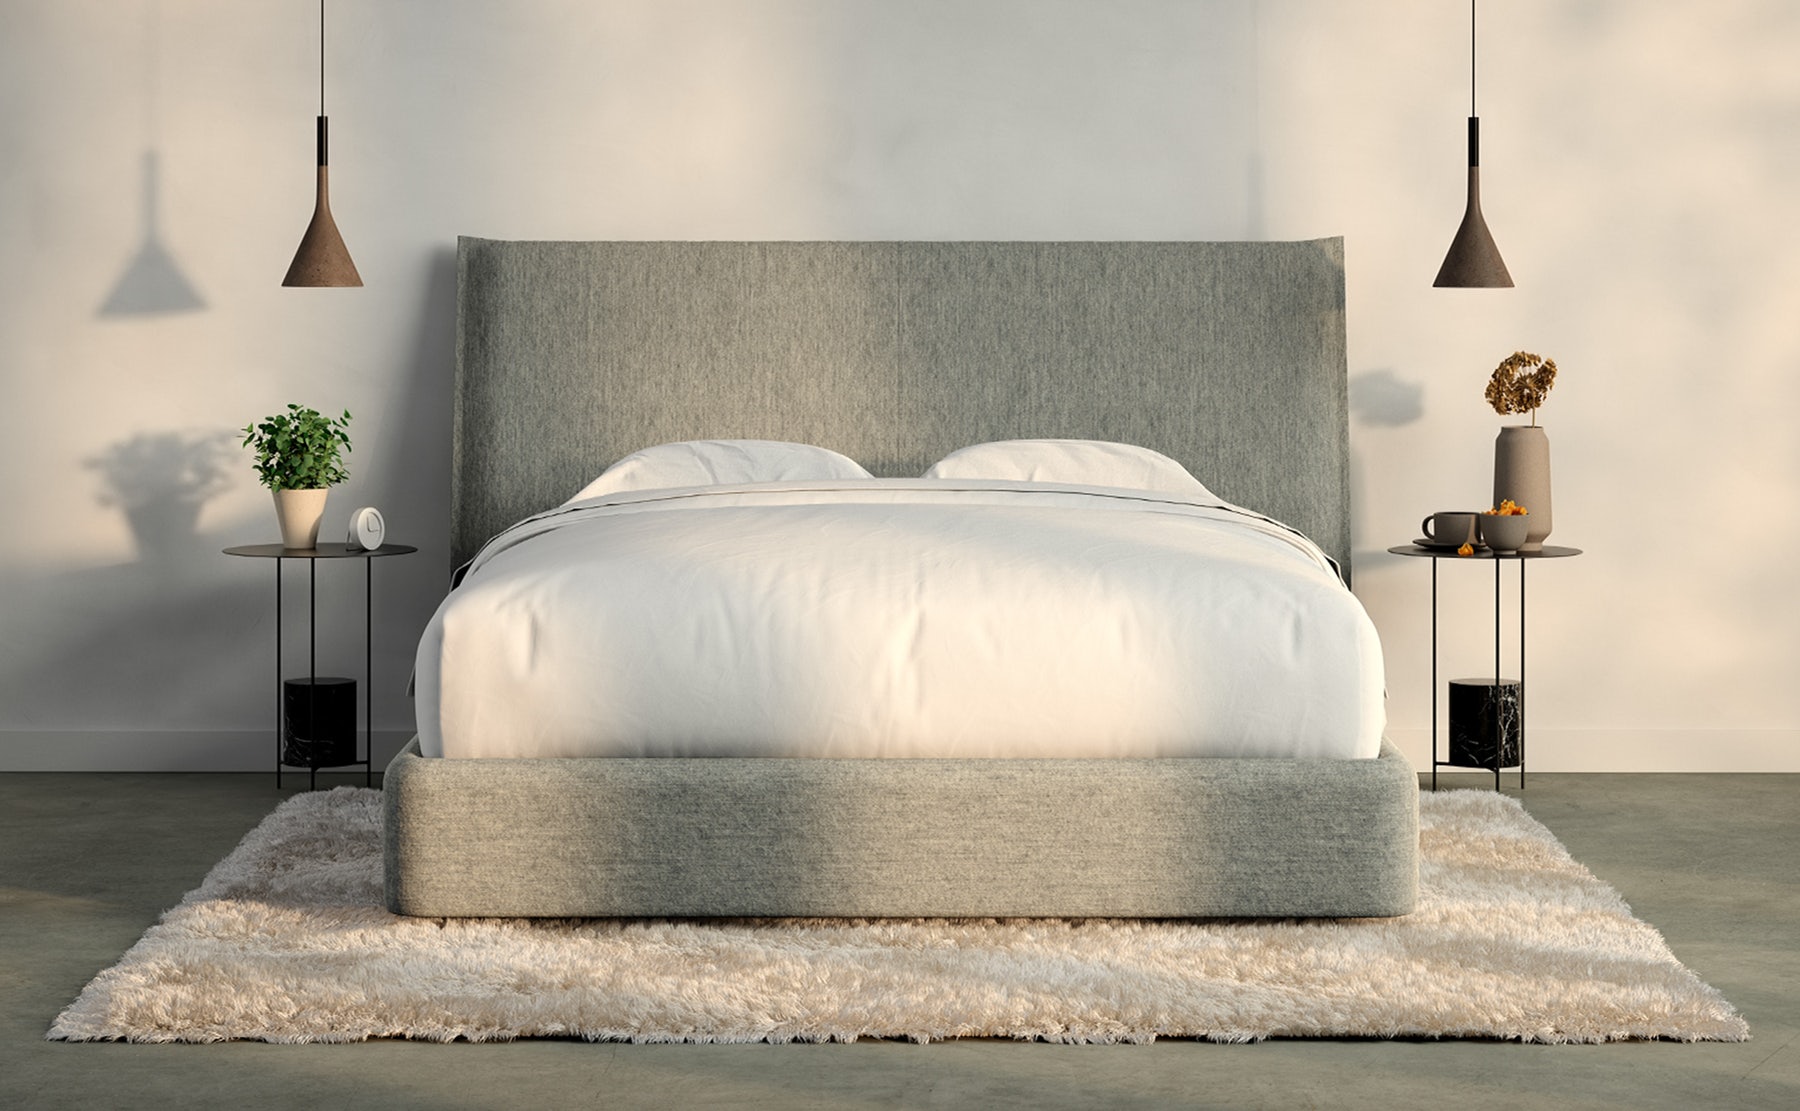 Mattress Sizes And Bed Dimensions Guide, What Is Wider Than A King Size Bed